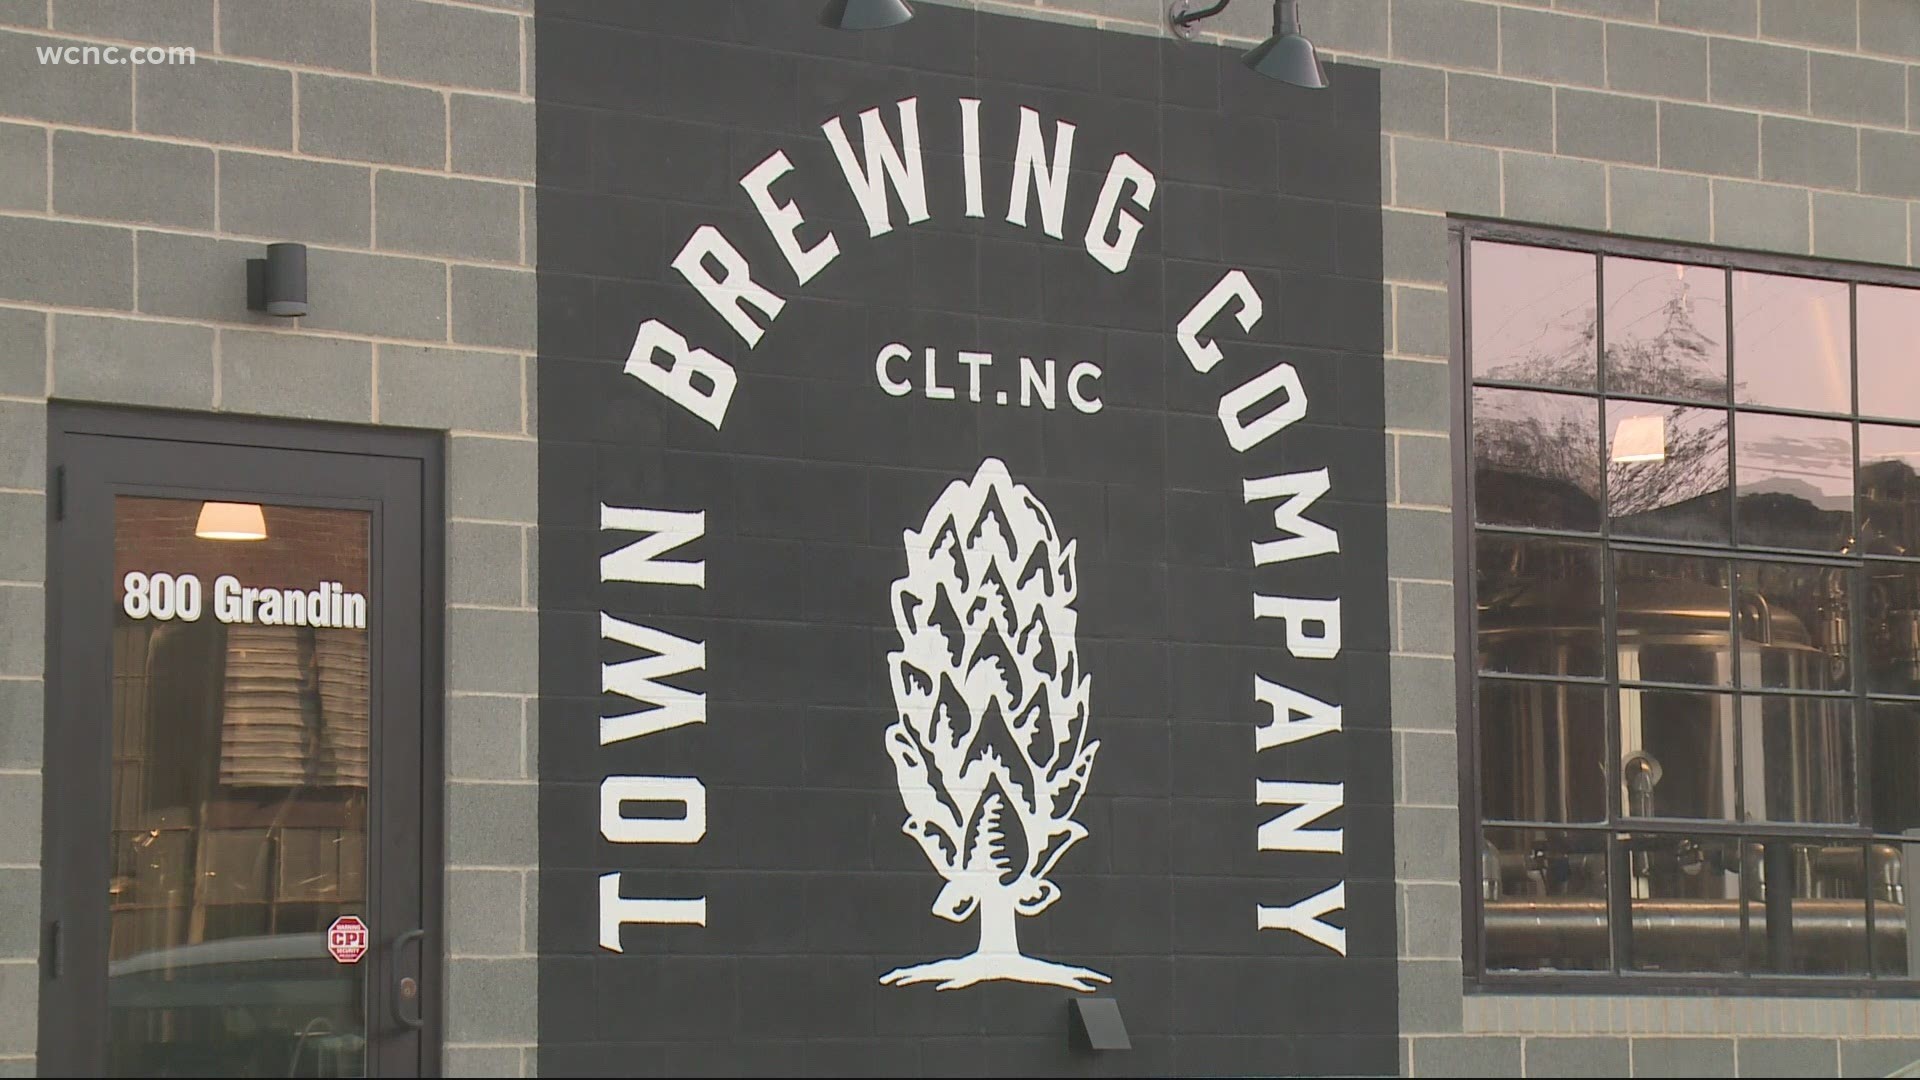 Two Charlotte breweries are partnering for a paid internship program with the goal of increasing diversity in the craft beer industry.